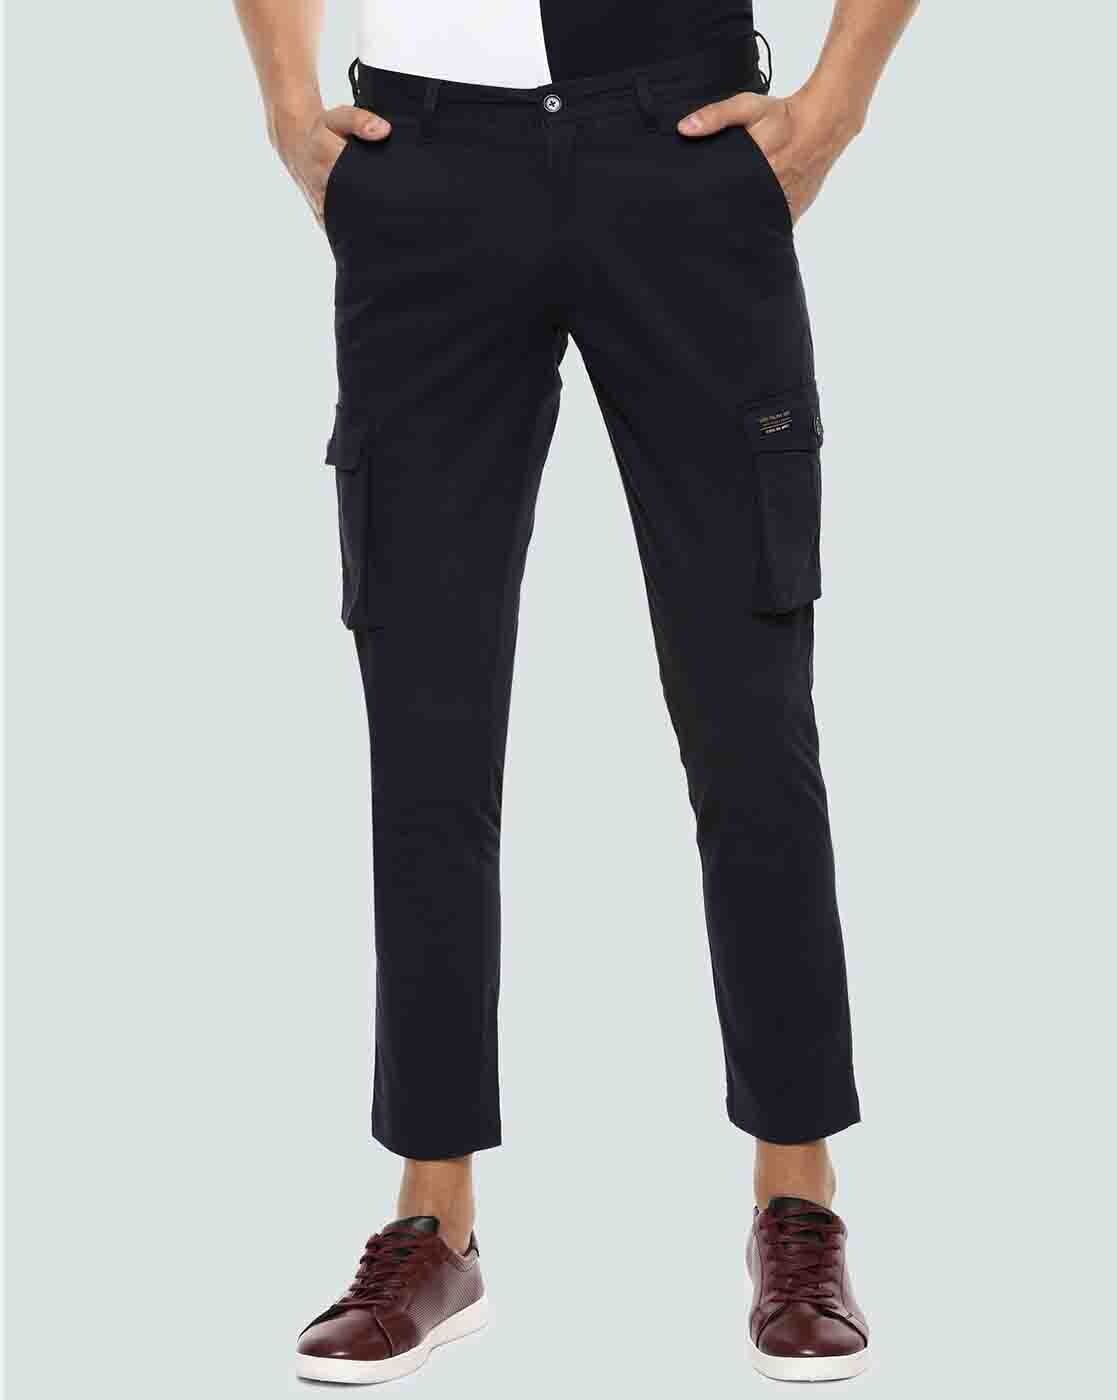 Buy Navy Trousers & Pants for Men by LOUIS PHILIPPE Online | Ajio.com